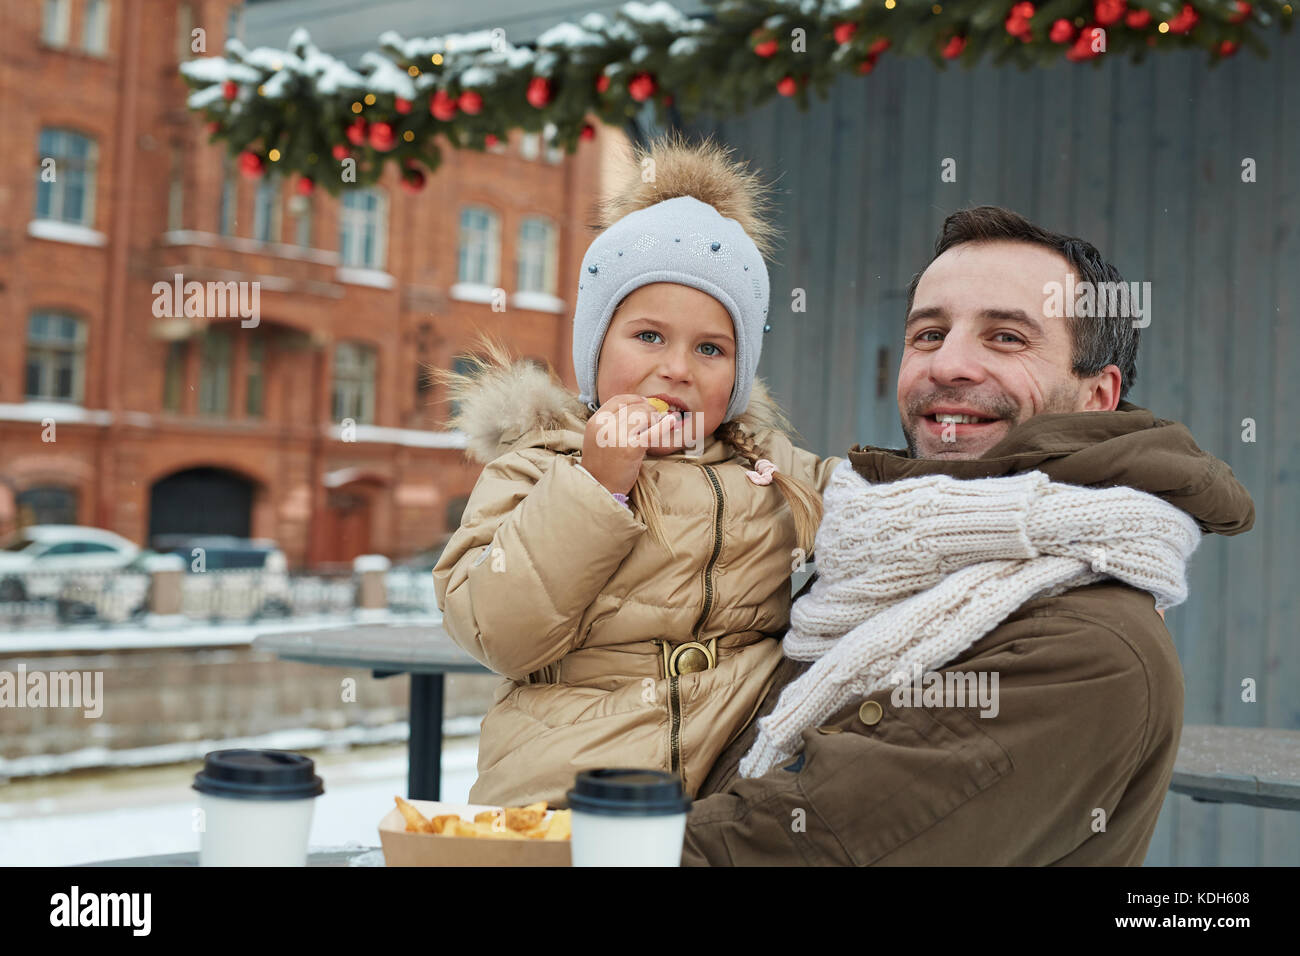 Hungry girl eating french fries sur son père hands outdoors Banque D'Images